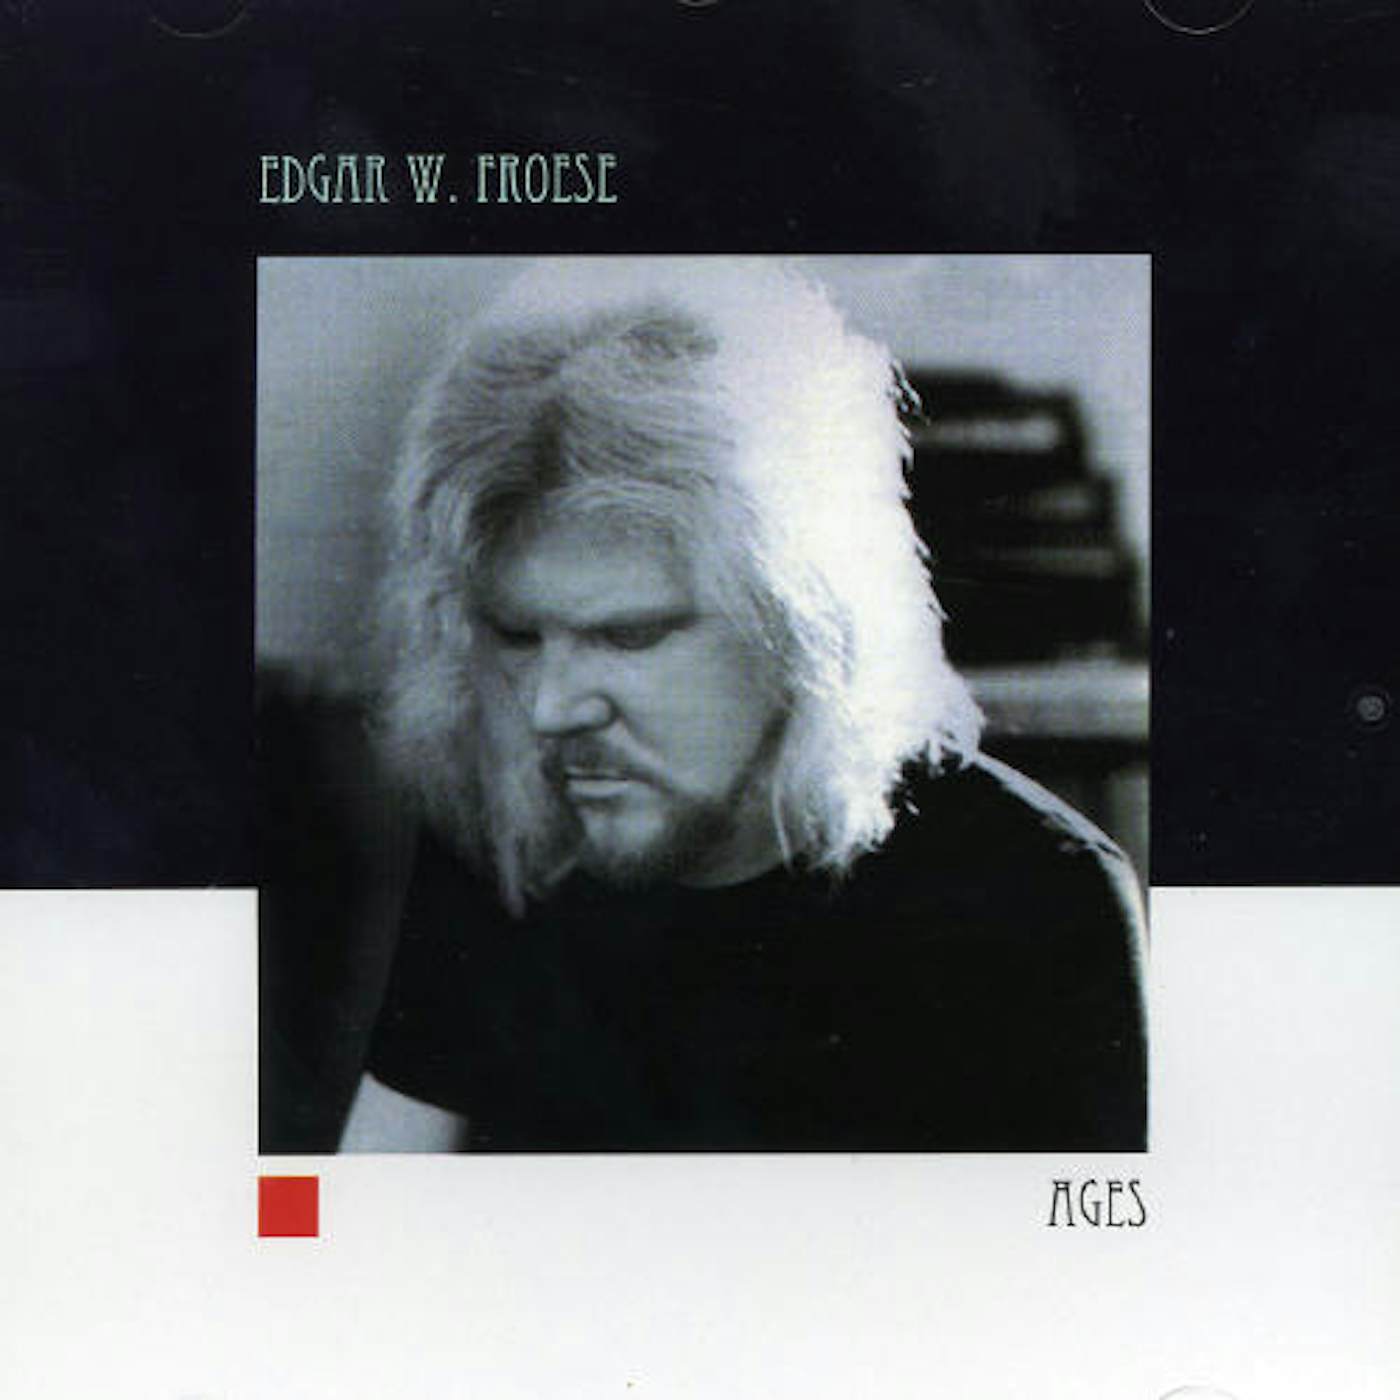 Edgar Froese AGES CD